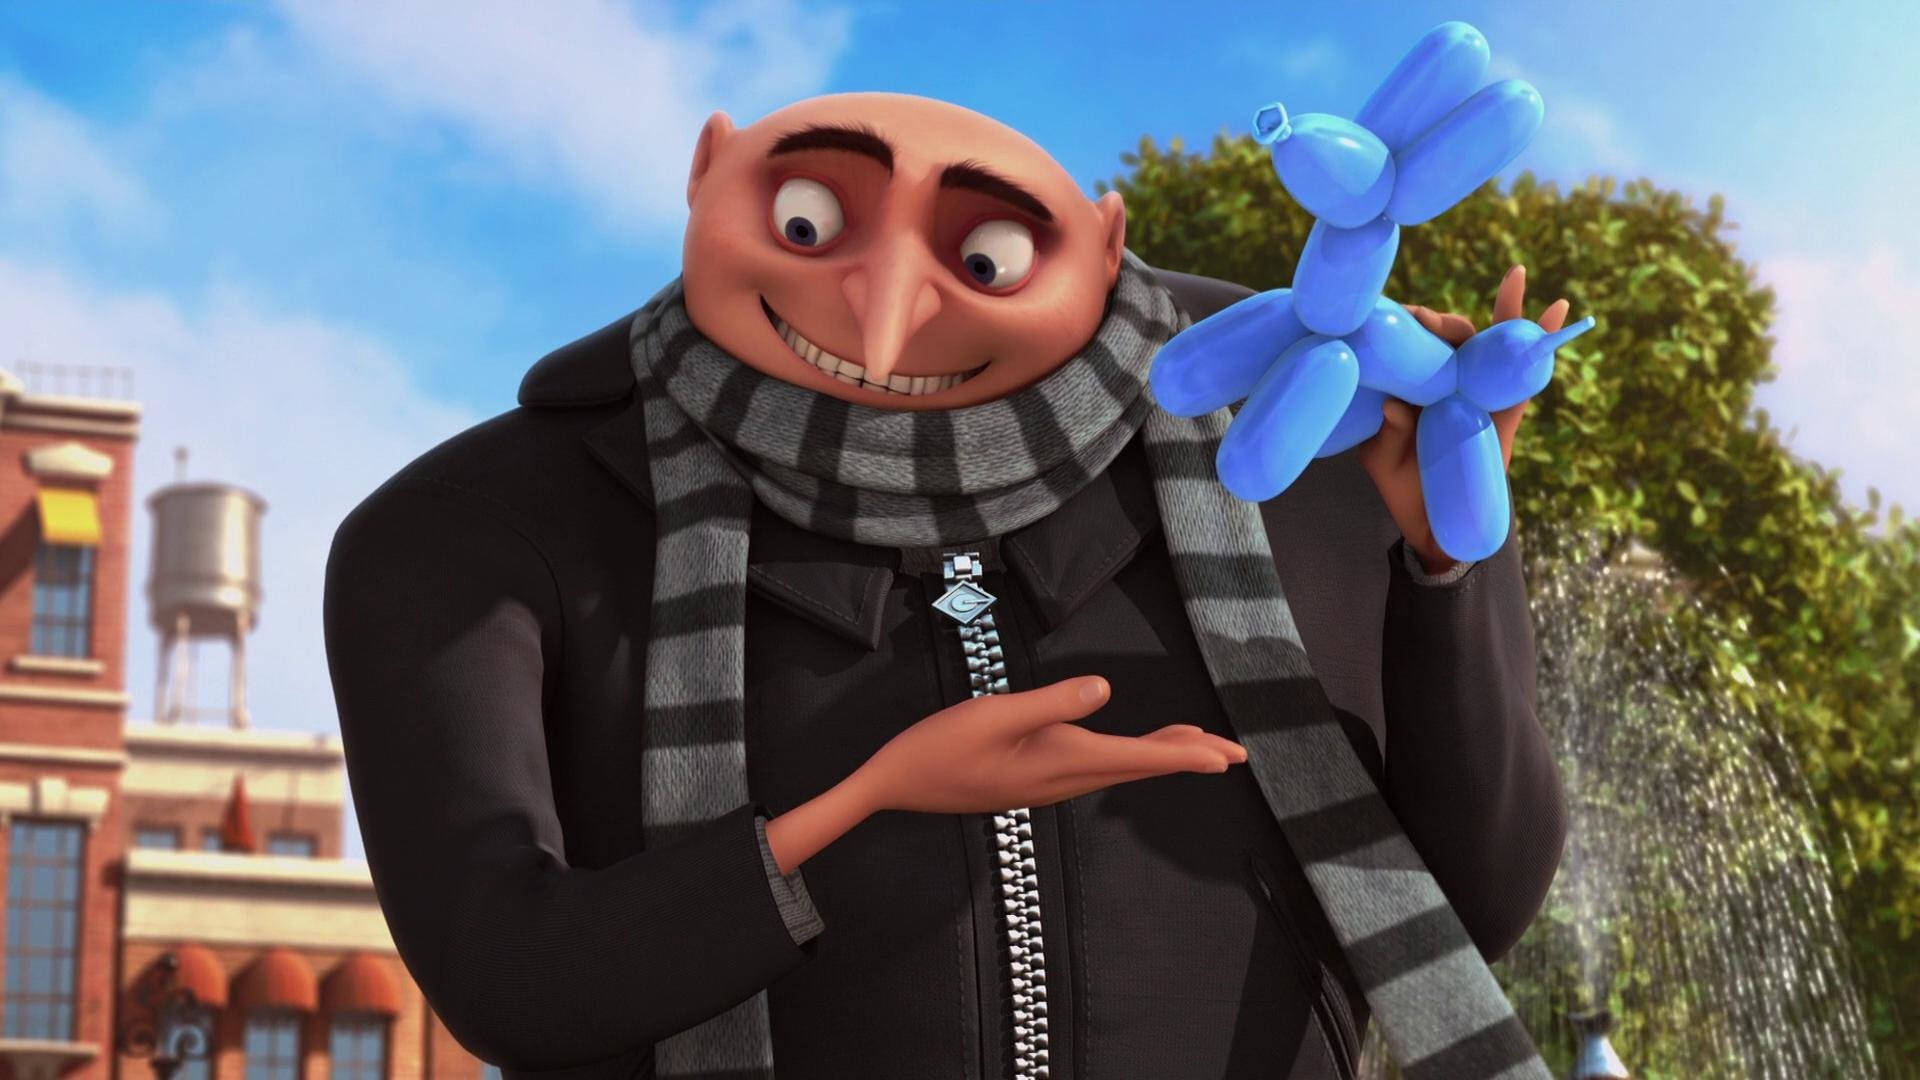 Despicable Me Gru With Balloon Background